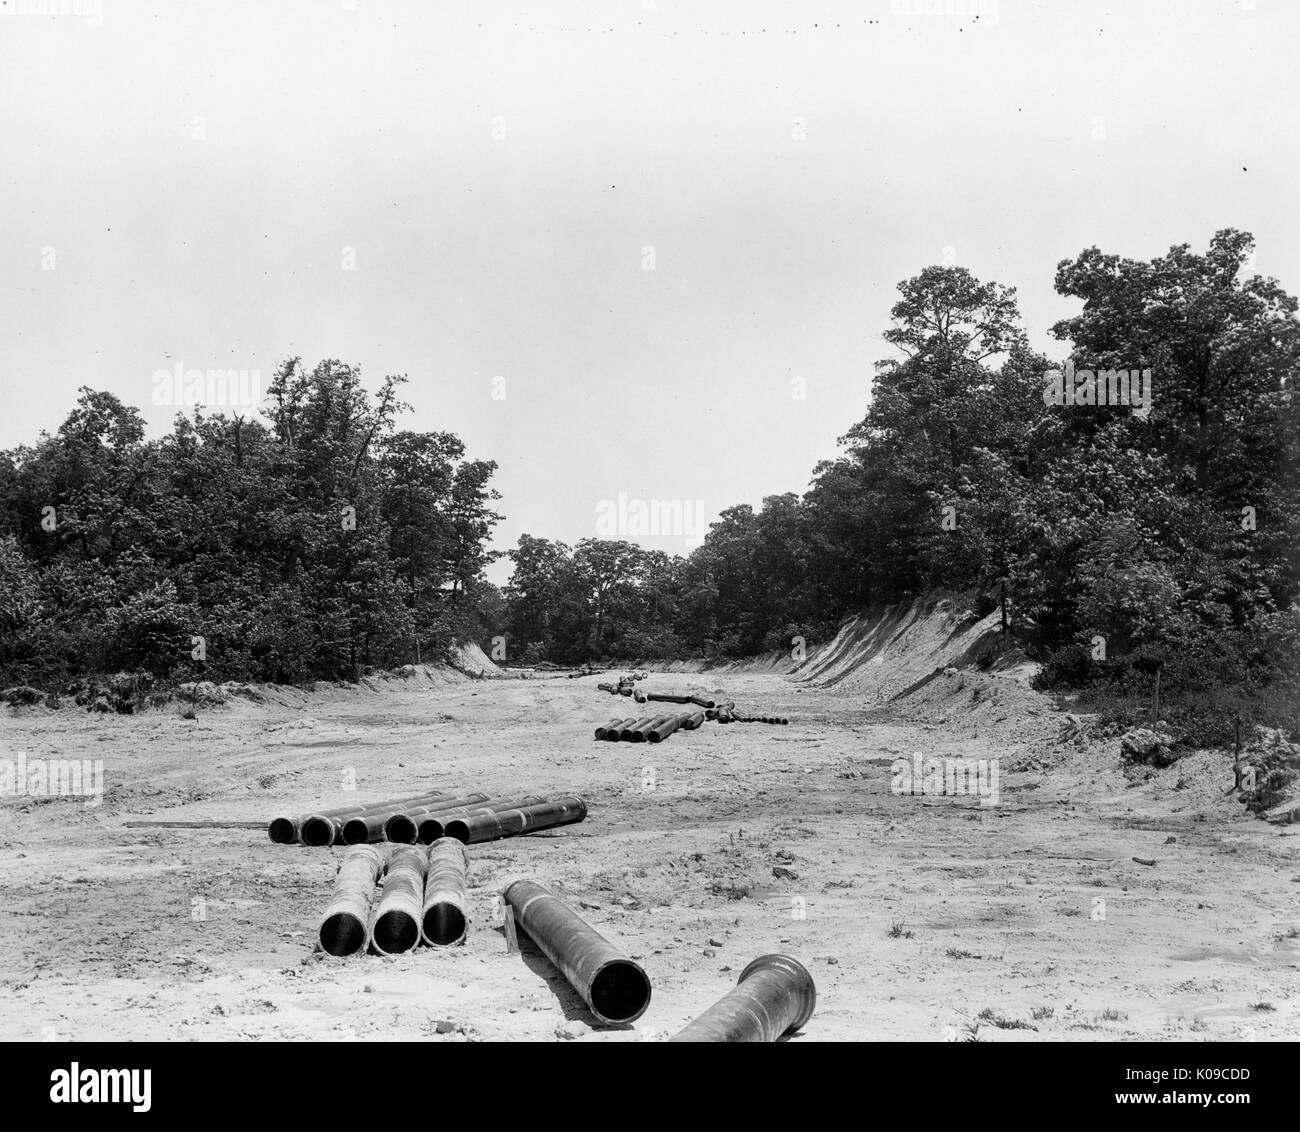 Northwood neighborhood land under construction, there are large pipes scattered on the dirt, there are trees and bushes in the background that are bordering the land, United States, 1950. Stock Photo